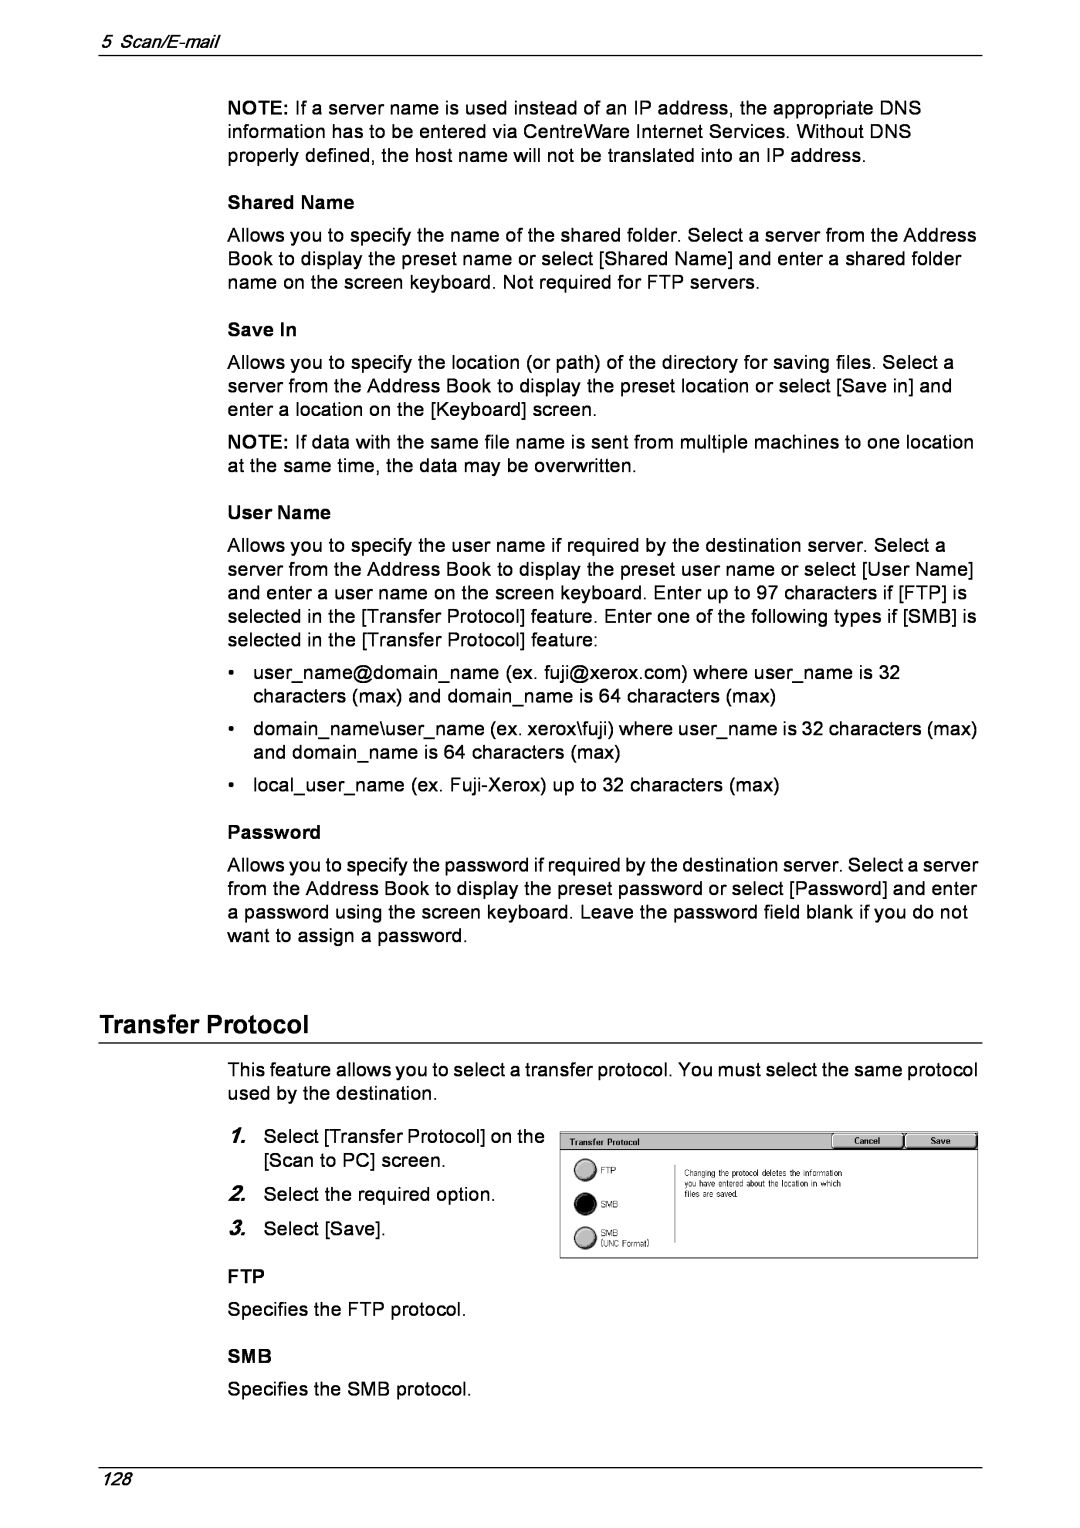 Xerox 5230 manual Transfer Protocol, Shared Name, Save In, User Name, Password 